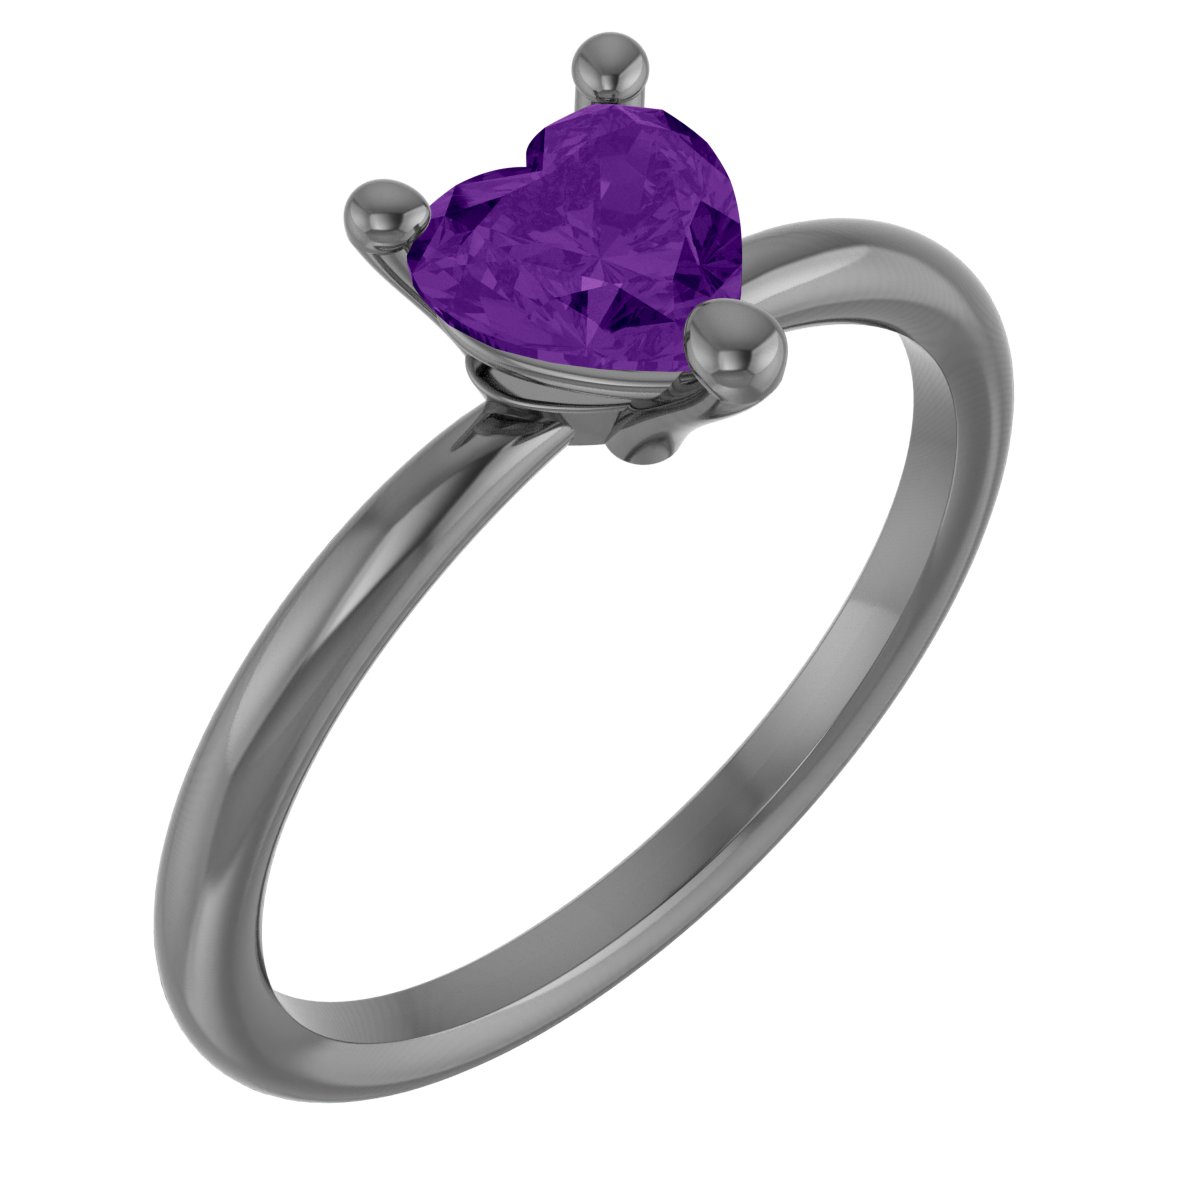 14K Yellow Natural Amethyst Heart Solitaire Ring